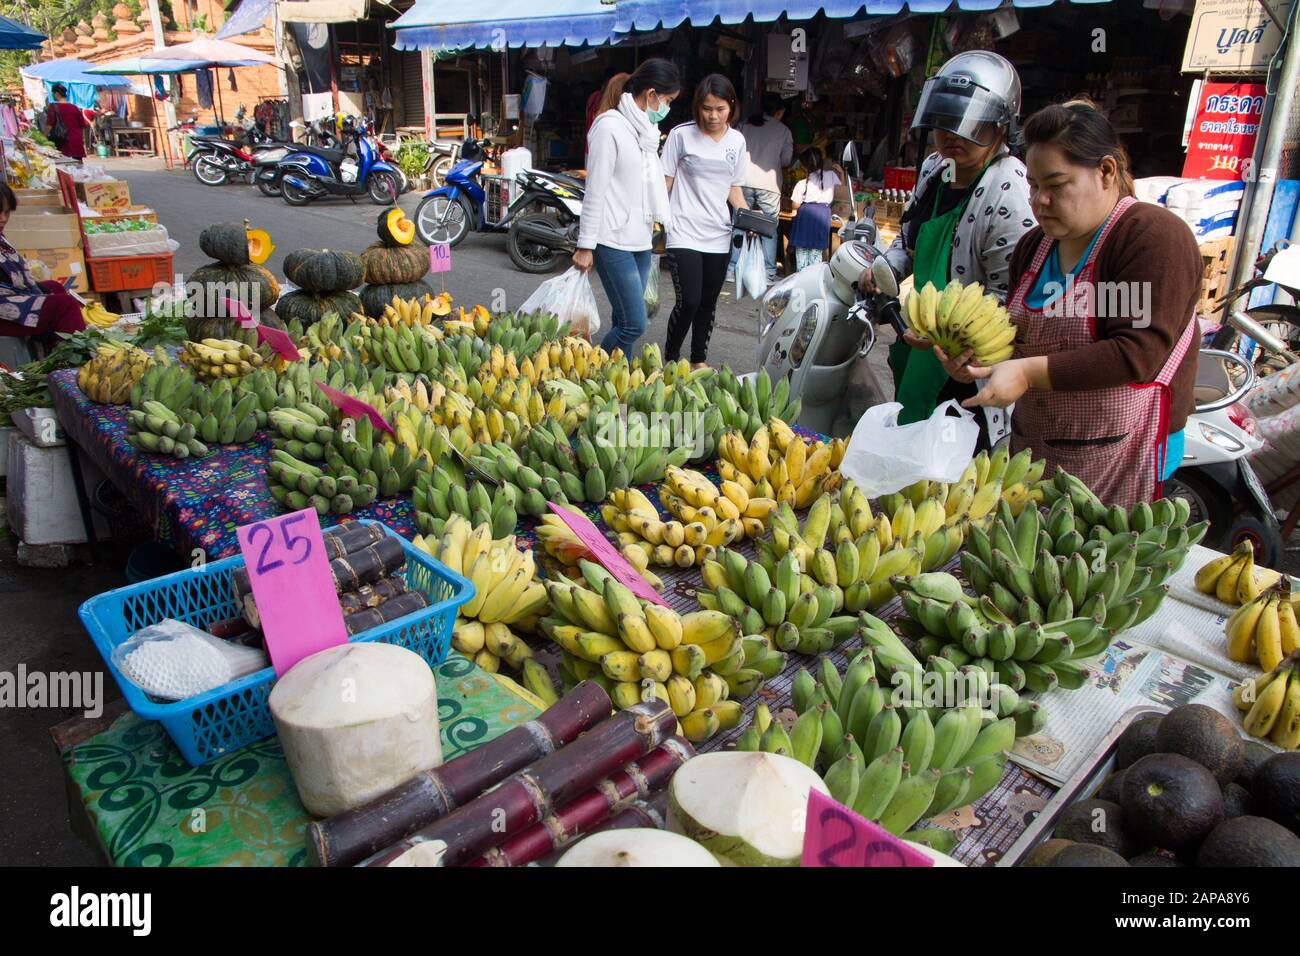 Chiang Mai Market Thailand city fruits vegetables people shopping Stock Photo